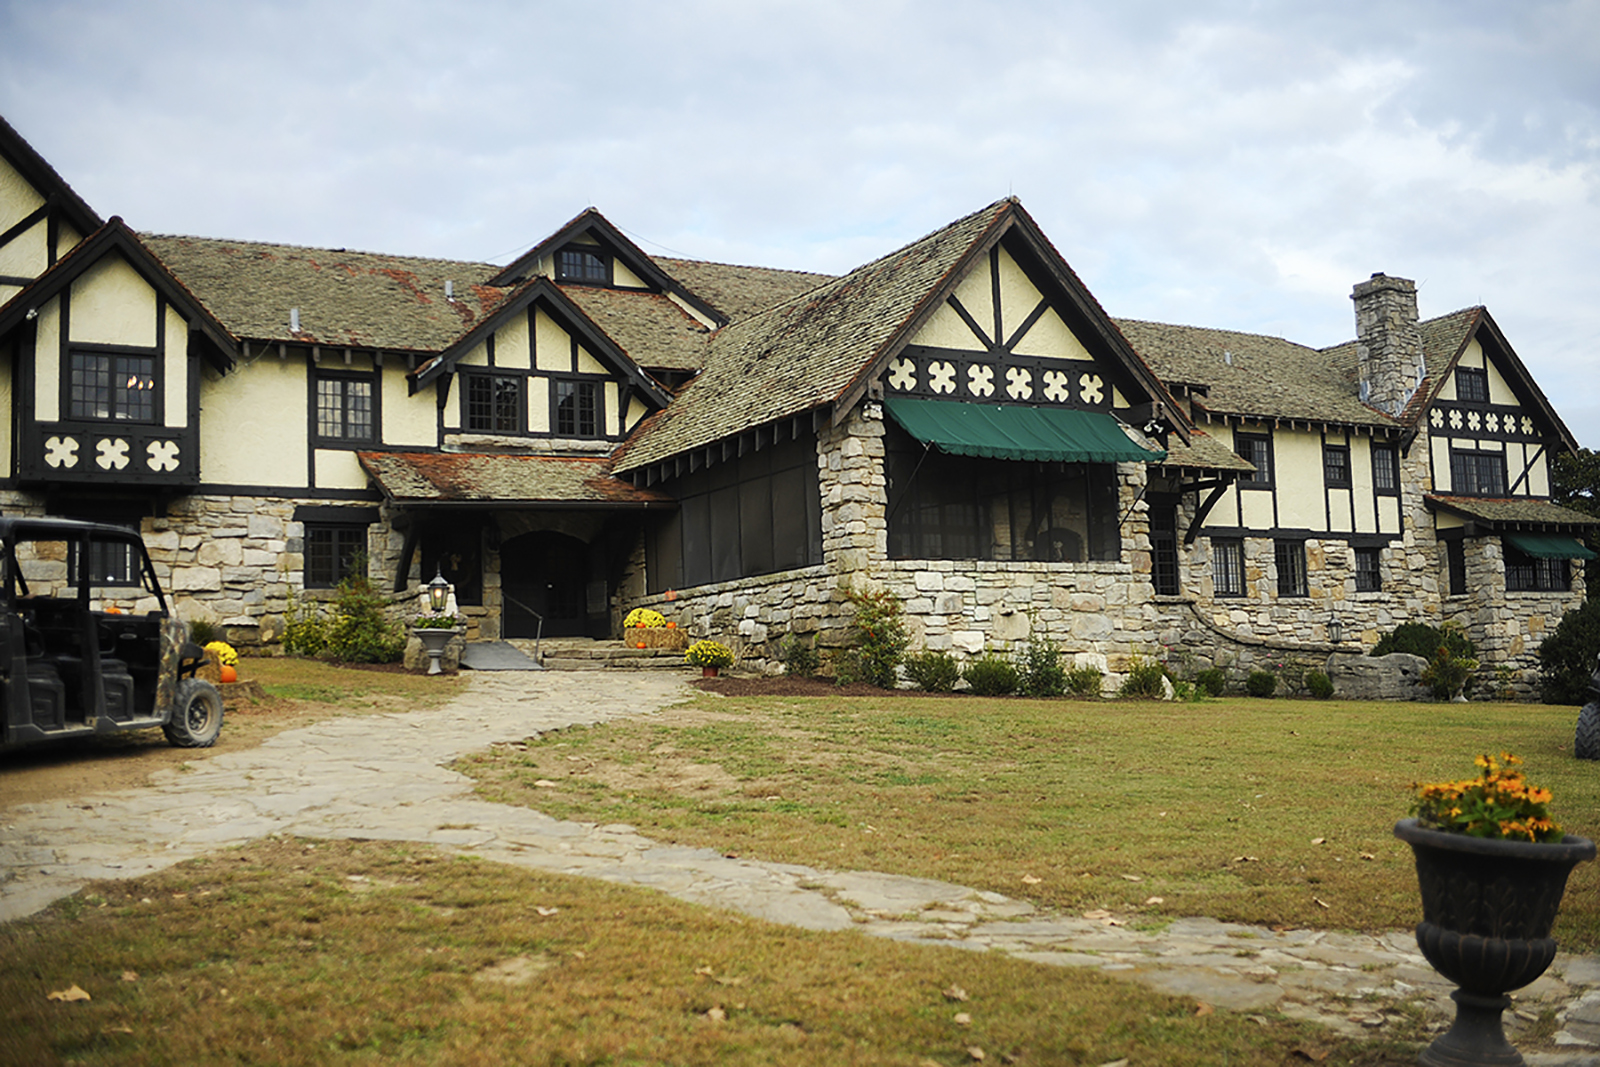 Milky Way manor house with beautiful stone work and dark stained wooden beams and accents.